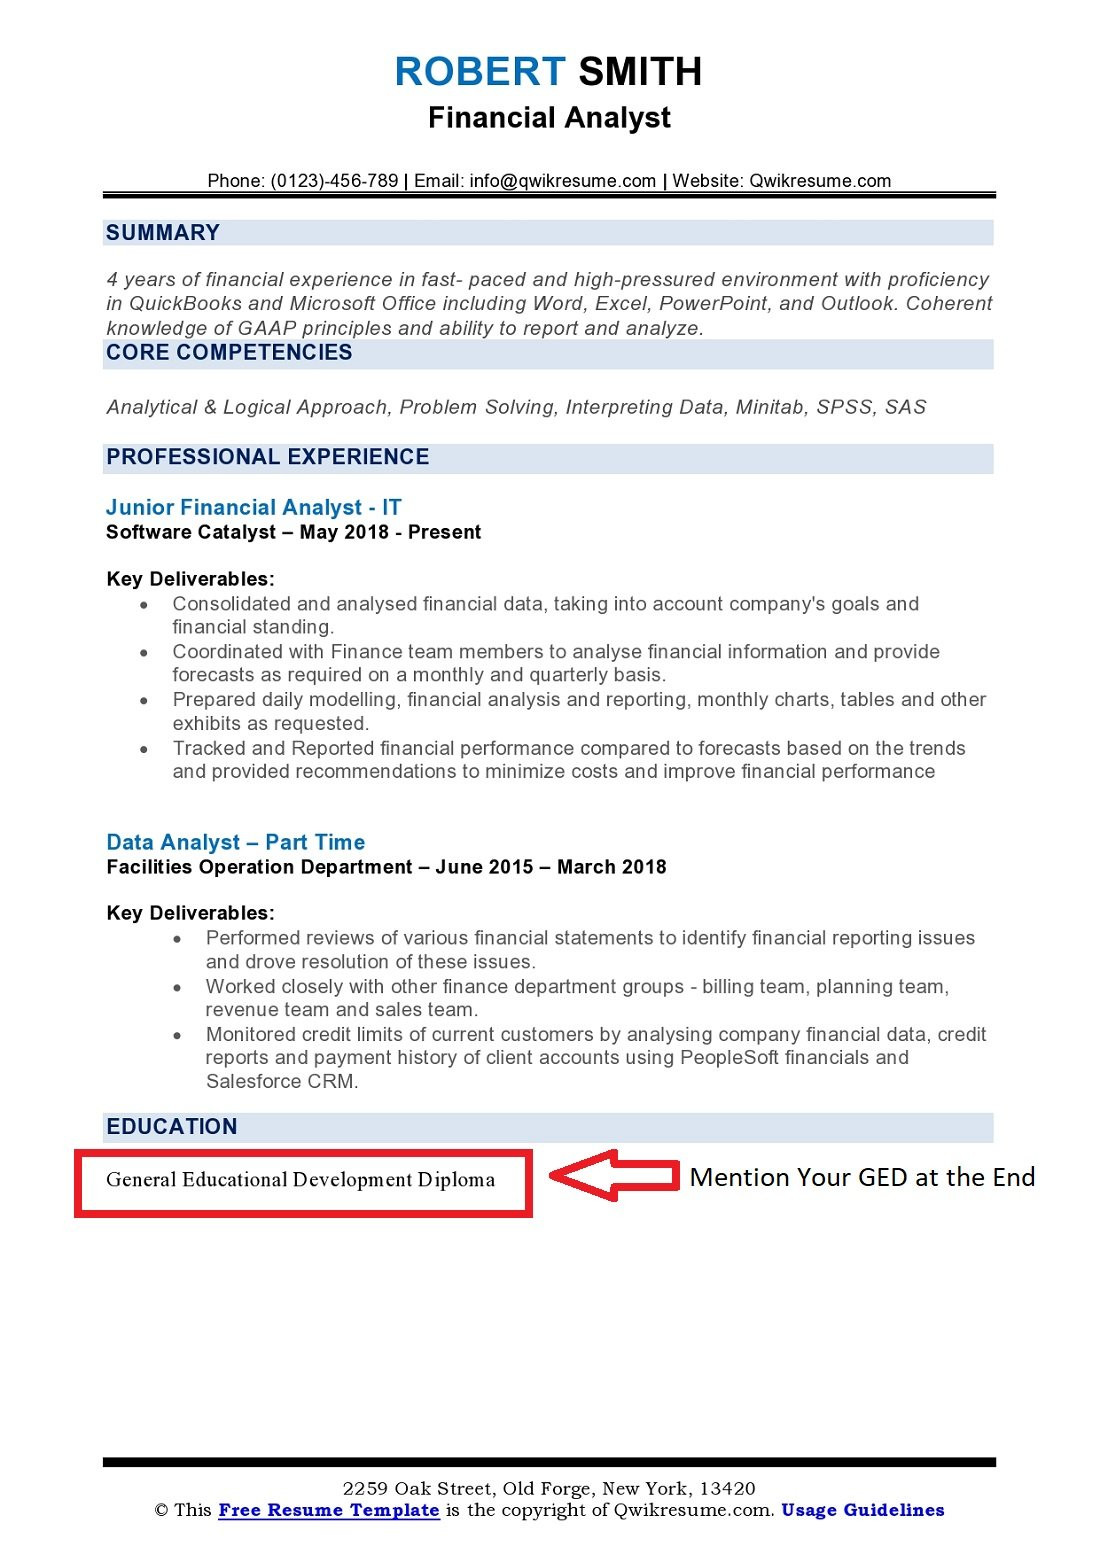 Sample Resume with Ged as Education How to Put Ged On Resume – Master Your Resume